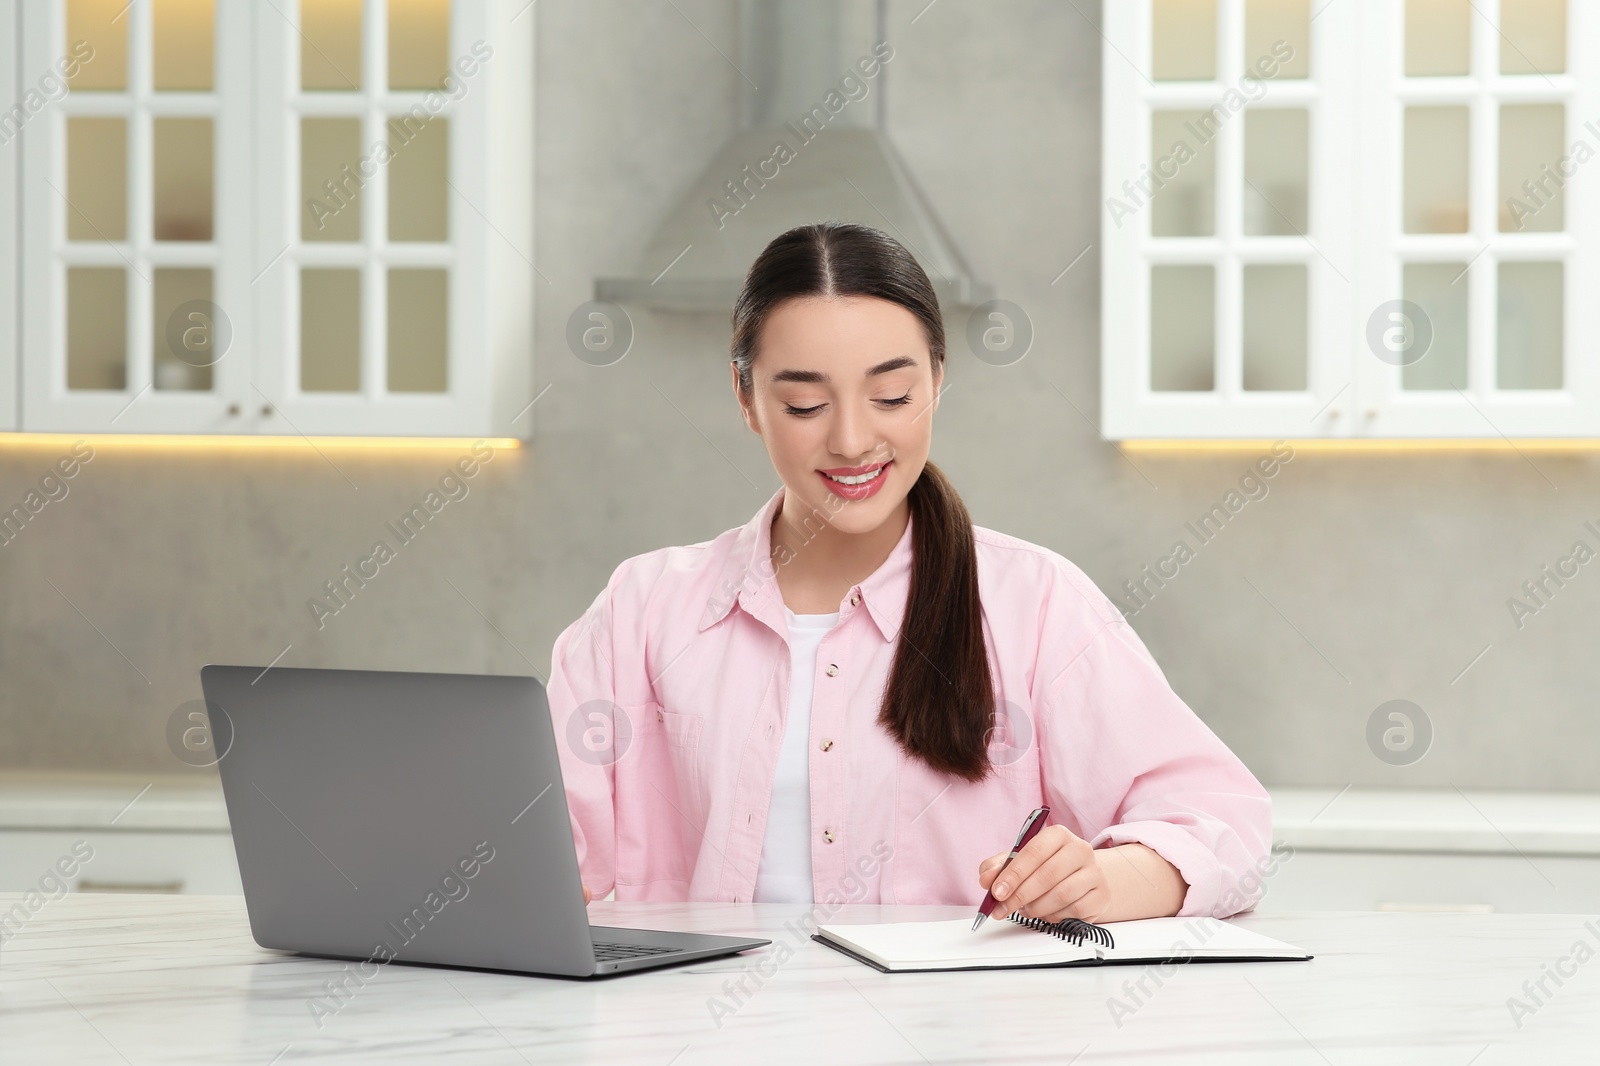 Photo of Woman writing something in notebook while using laptop at white table in kitchen